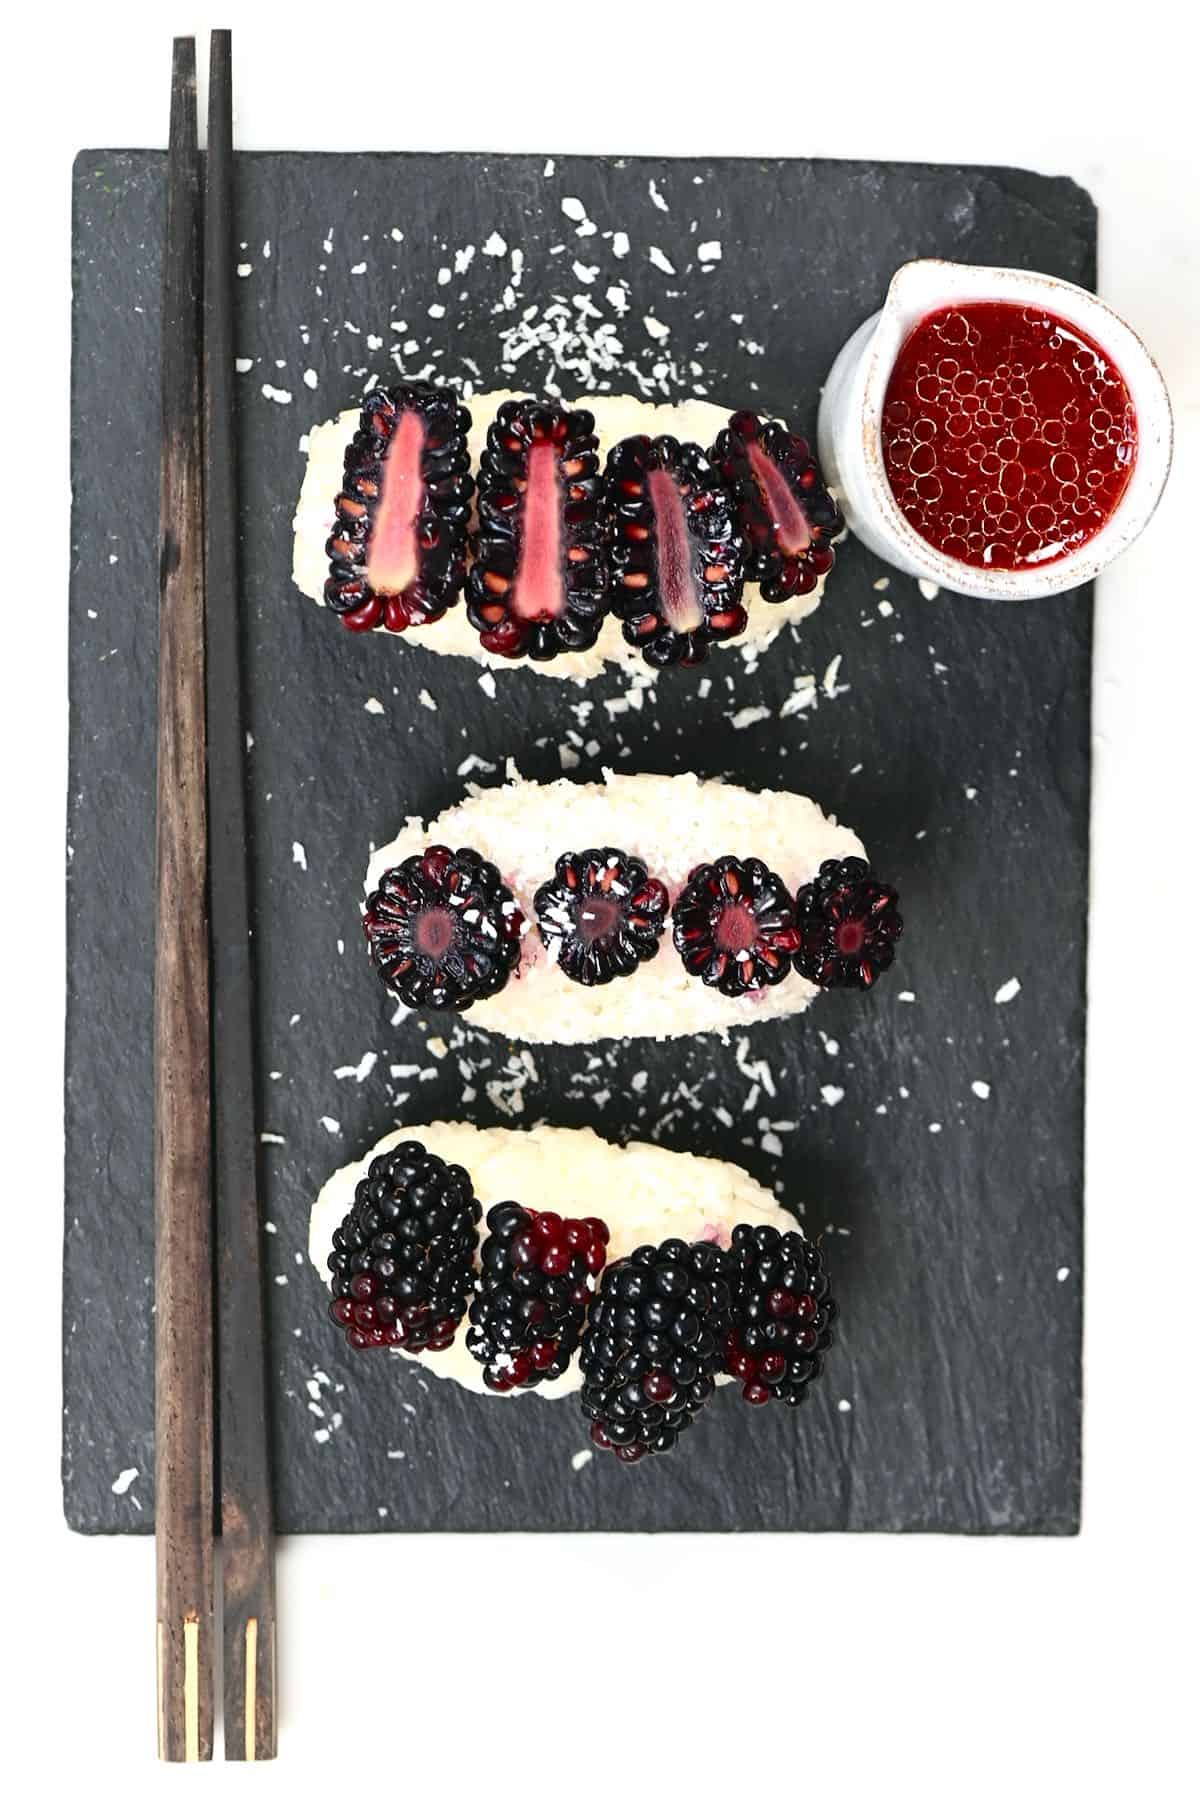 Fruit Sushi with blackberries